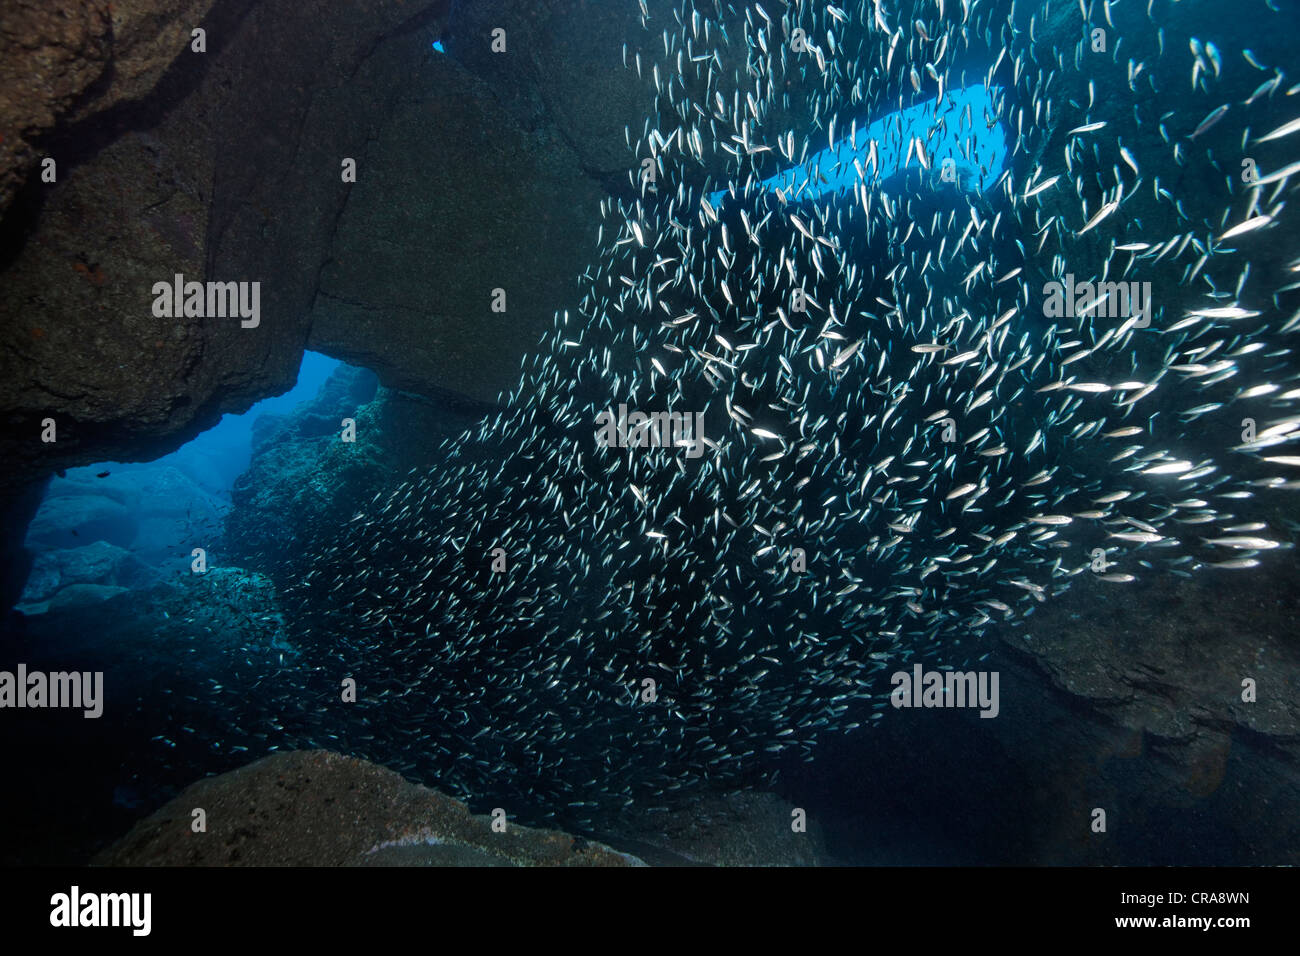 School of Sand Smelts (Atherina presbyter) swimming through cave, Madeira, Portugal, Europe, Atlantic Stock Photo